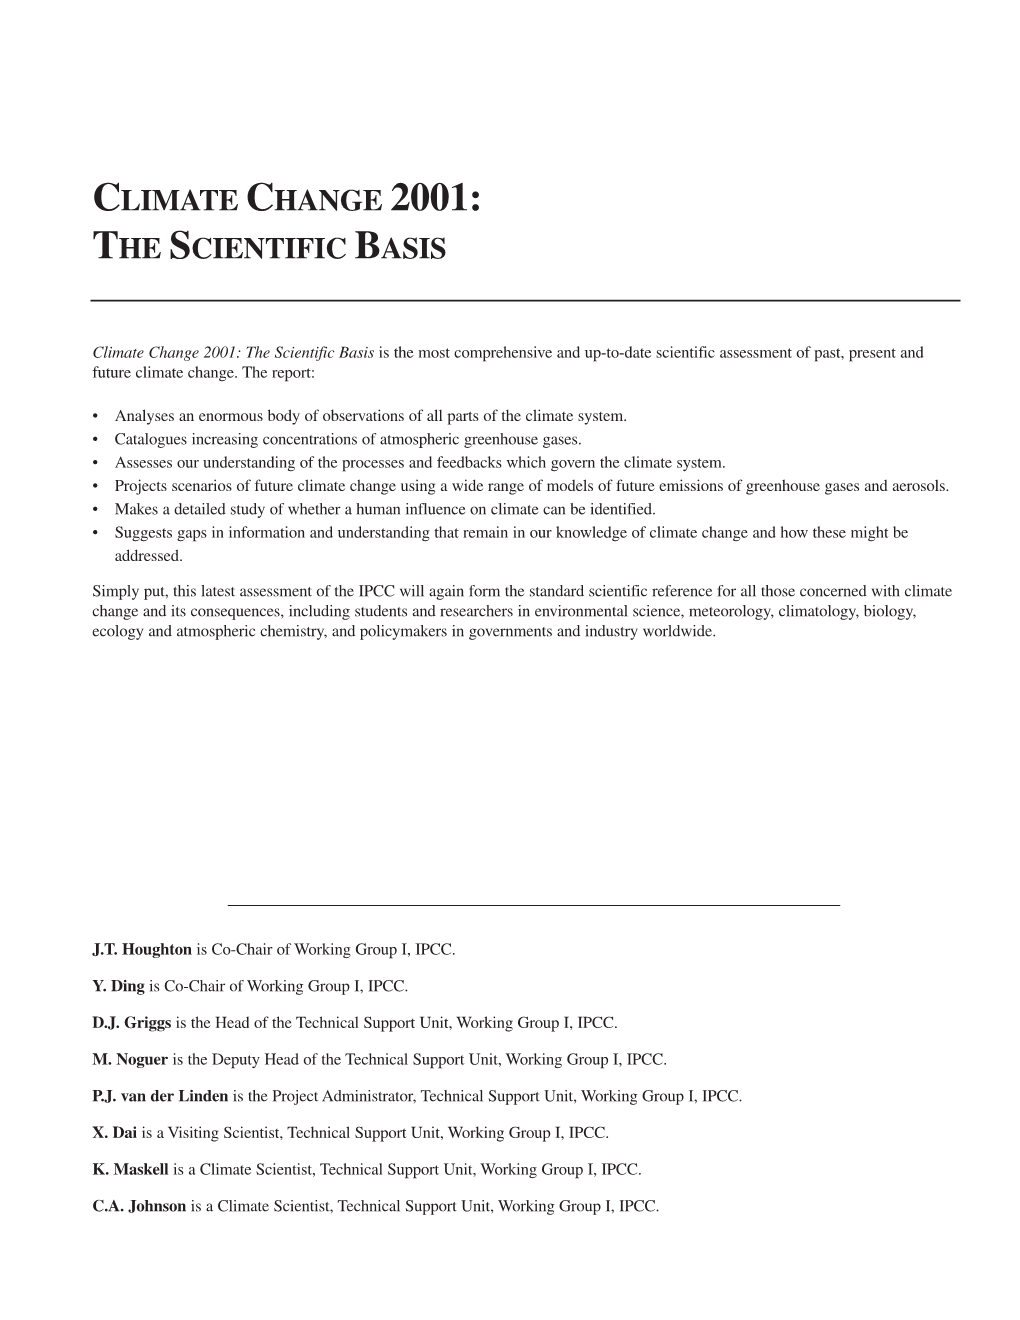 Climate Change 2001: the Scientific Basis